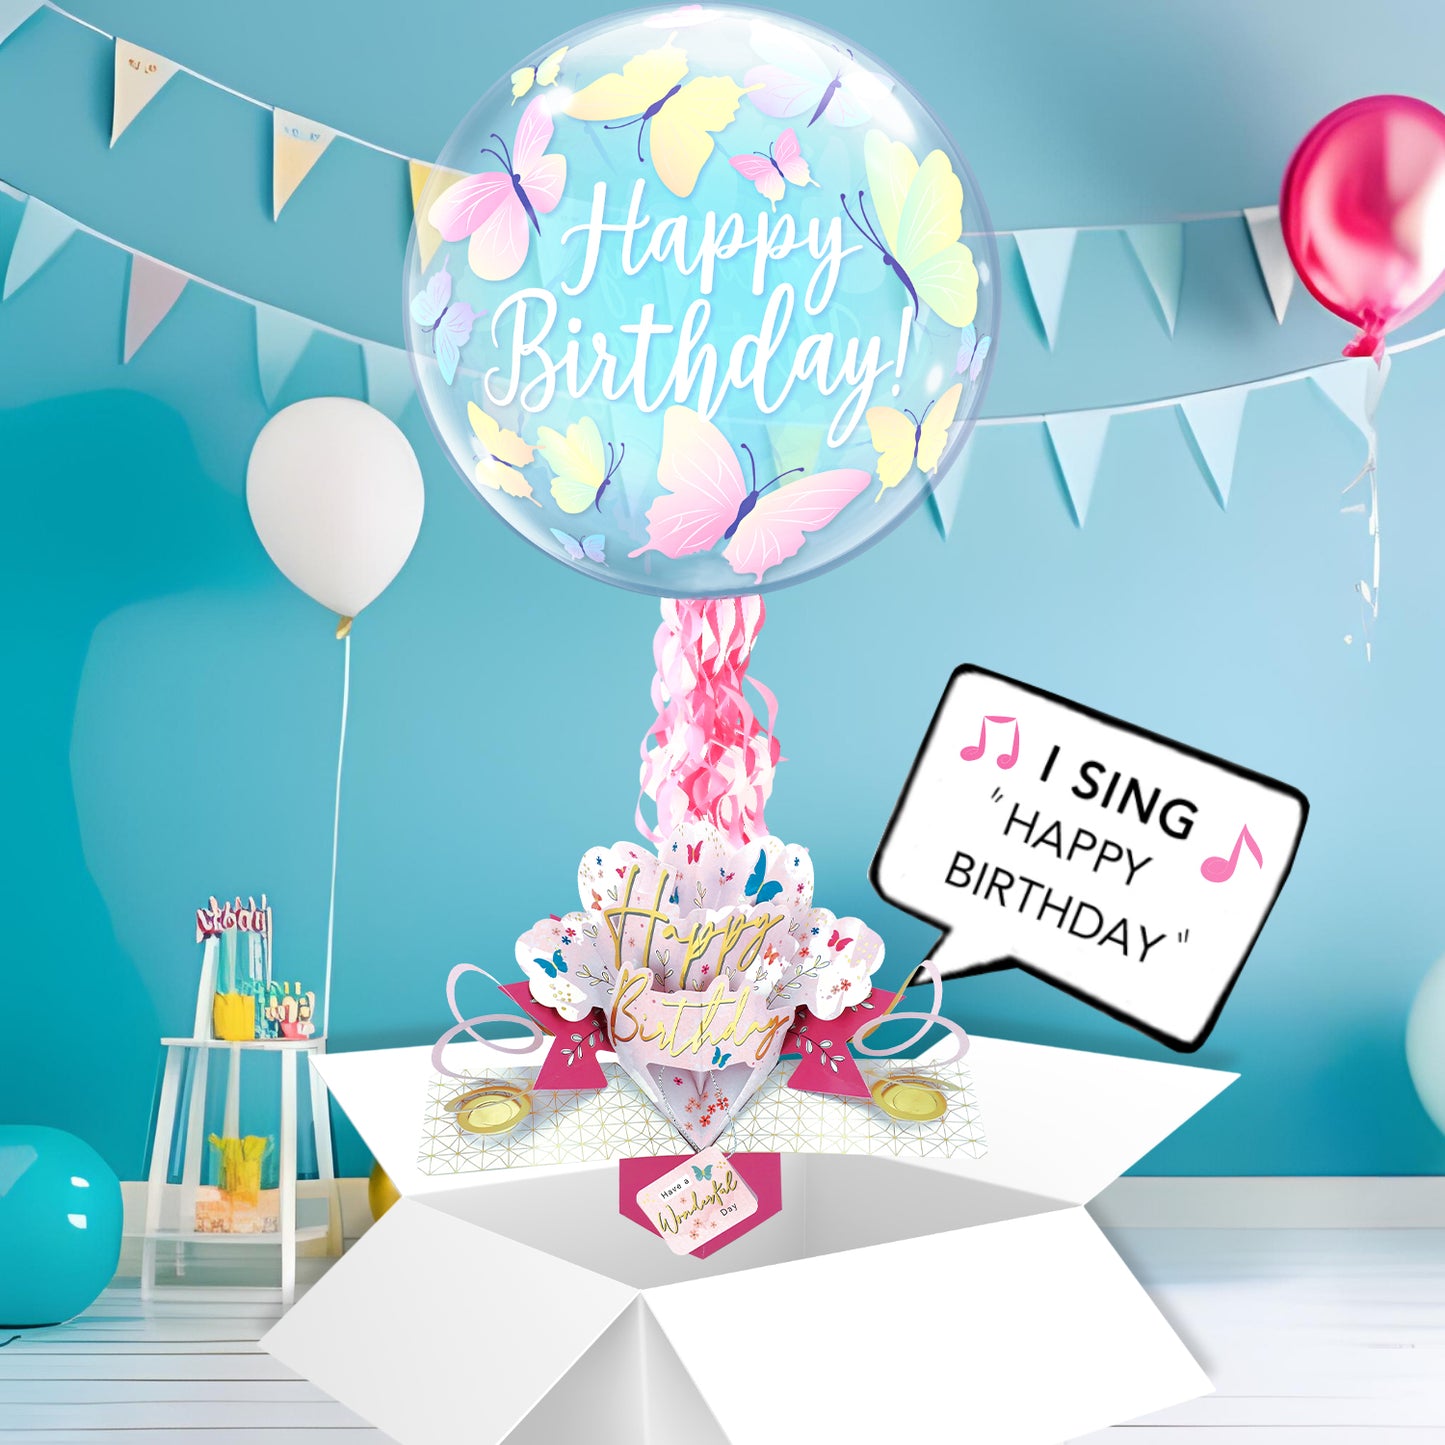 For Her Birthday Pop Up Card & Musical Balloon Surprise Delivered In A Box